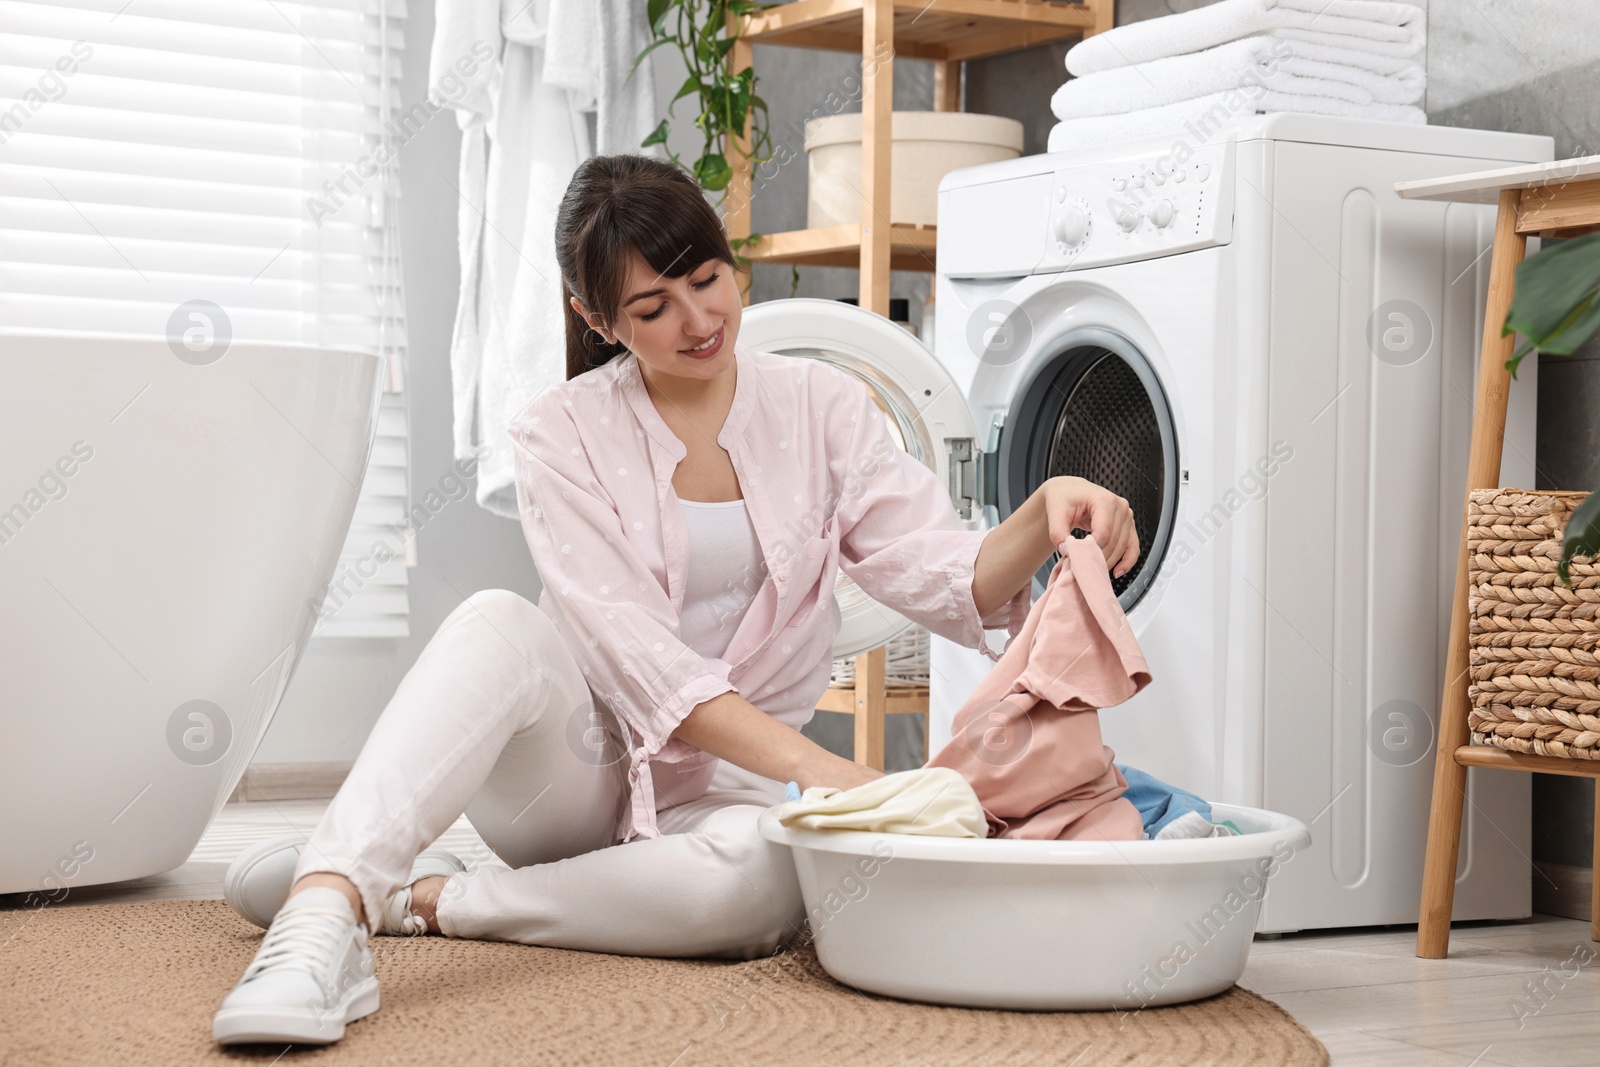 Photo of Happy young housewife with laundry near washing machine at home